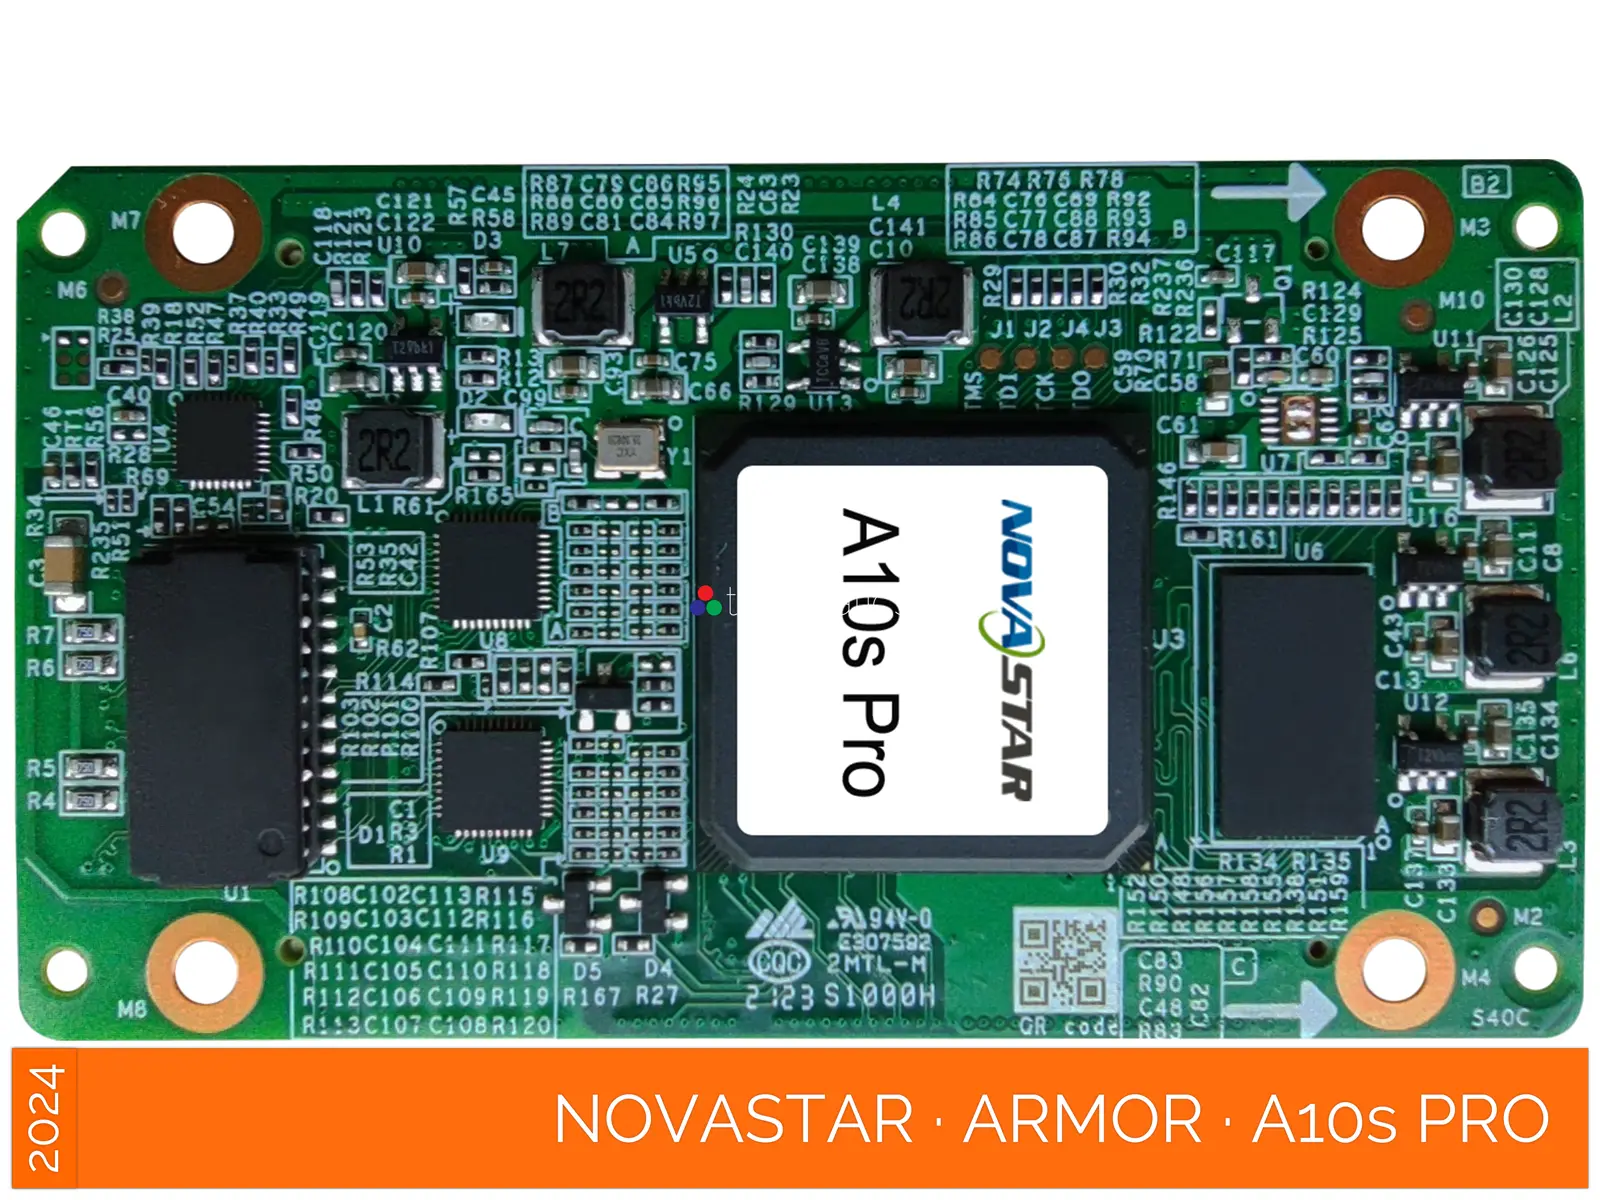 NovaStar COEX · Receiver Card · Armor Series · A10s Pro · Direct View LED Display Card · 512 × 512 @ 60hz · Vision Management Platform · Viplex · review · price · cost · priced from $ 80 per receiver card